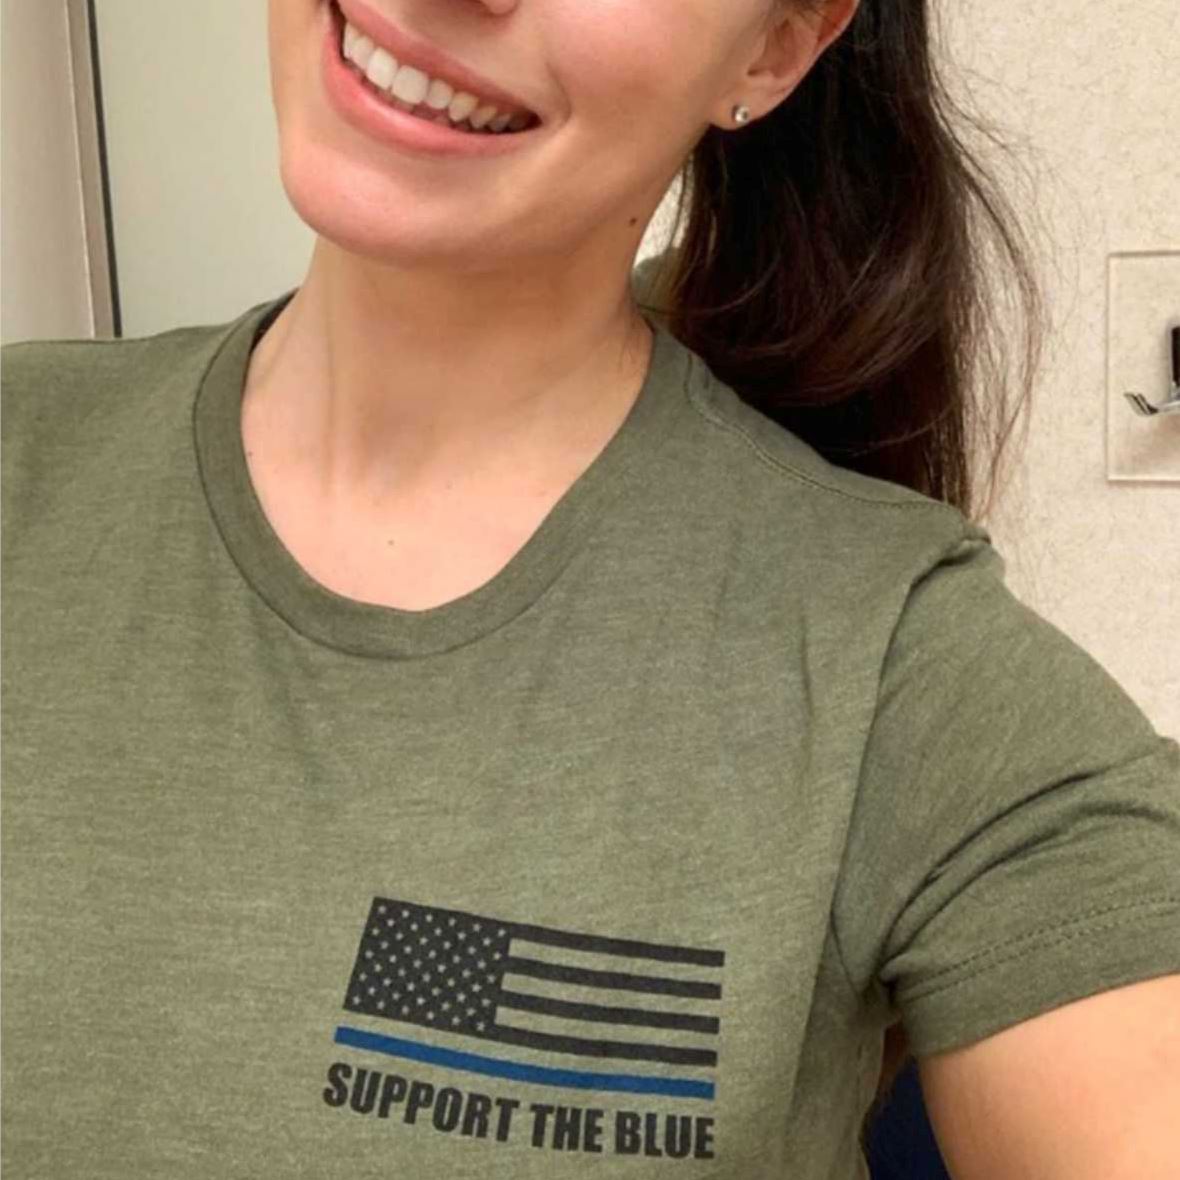 Thin Blue Line "Support The Blue" Flag - T-Shirt - Military Green T-Shirts Blue Life Apparel 